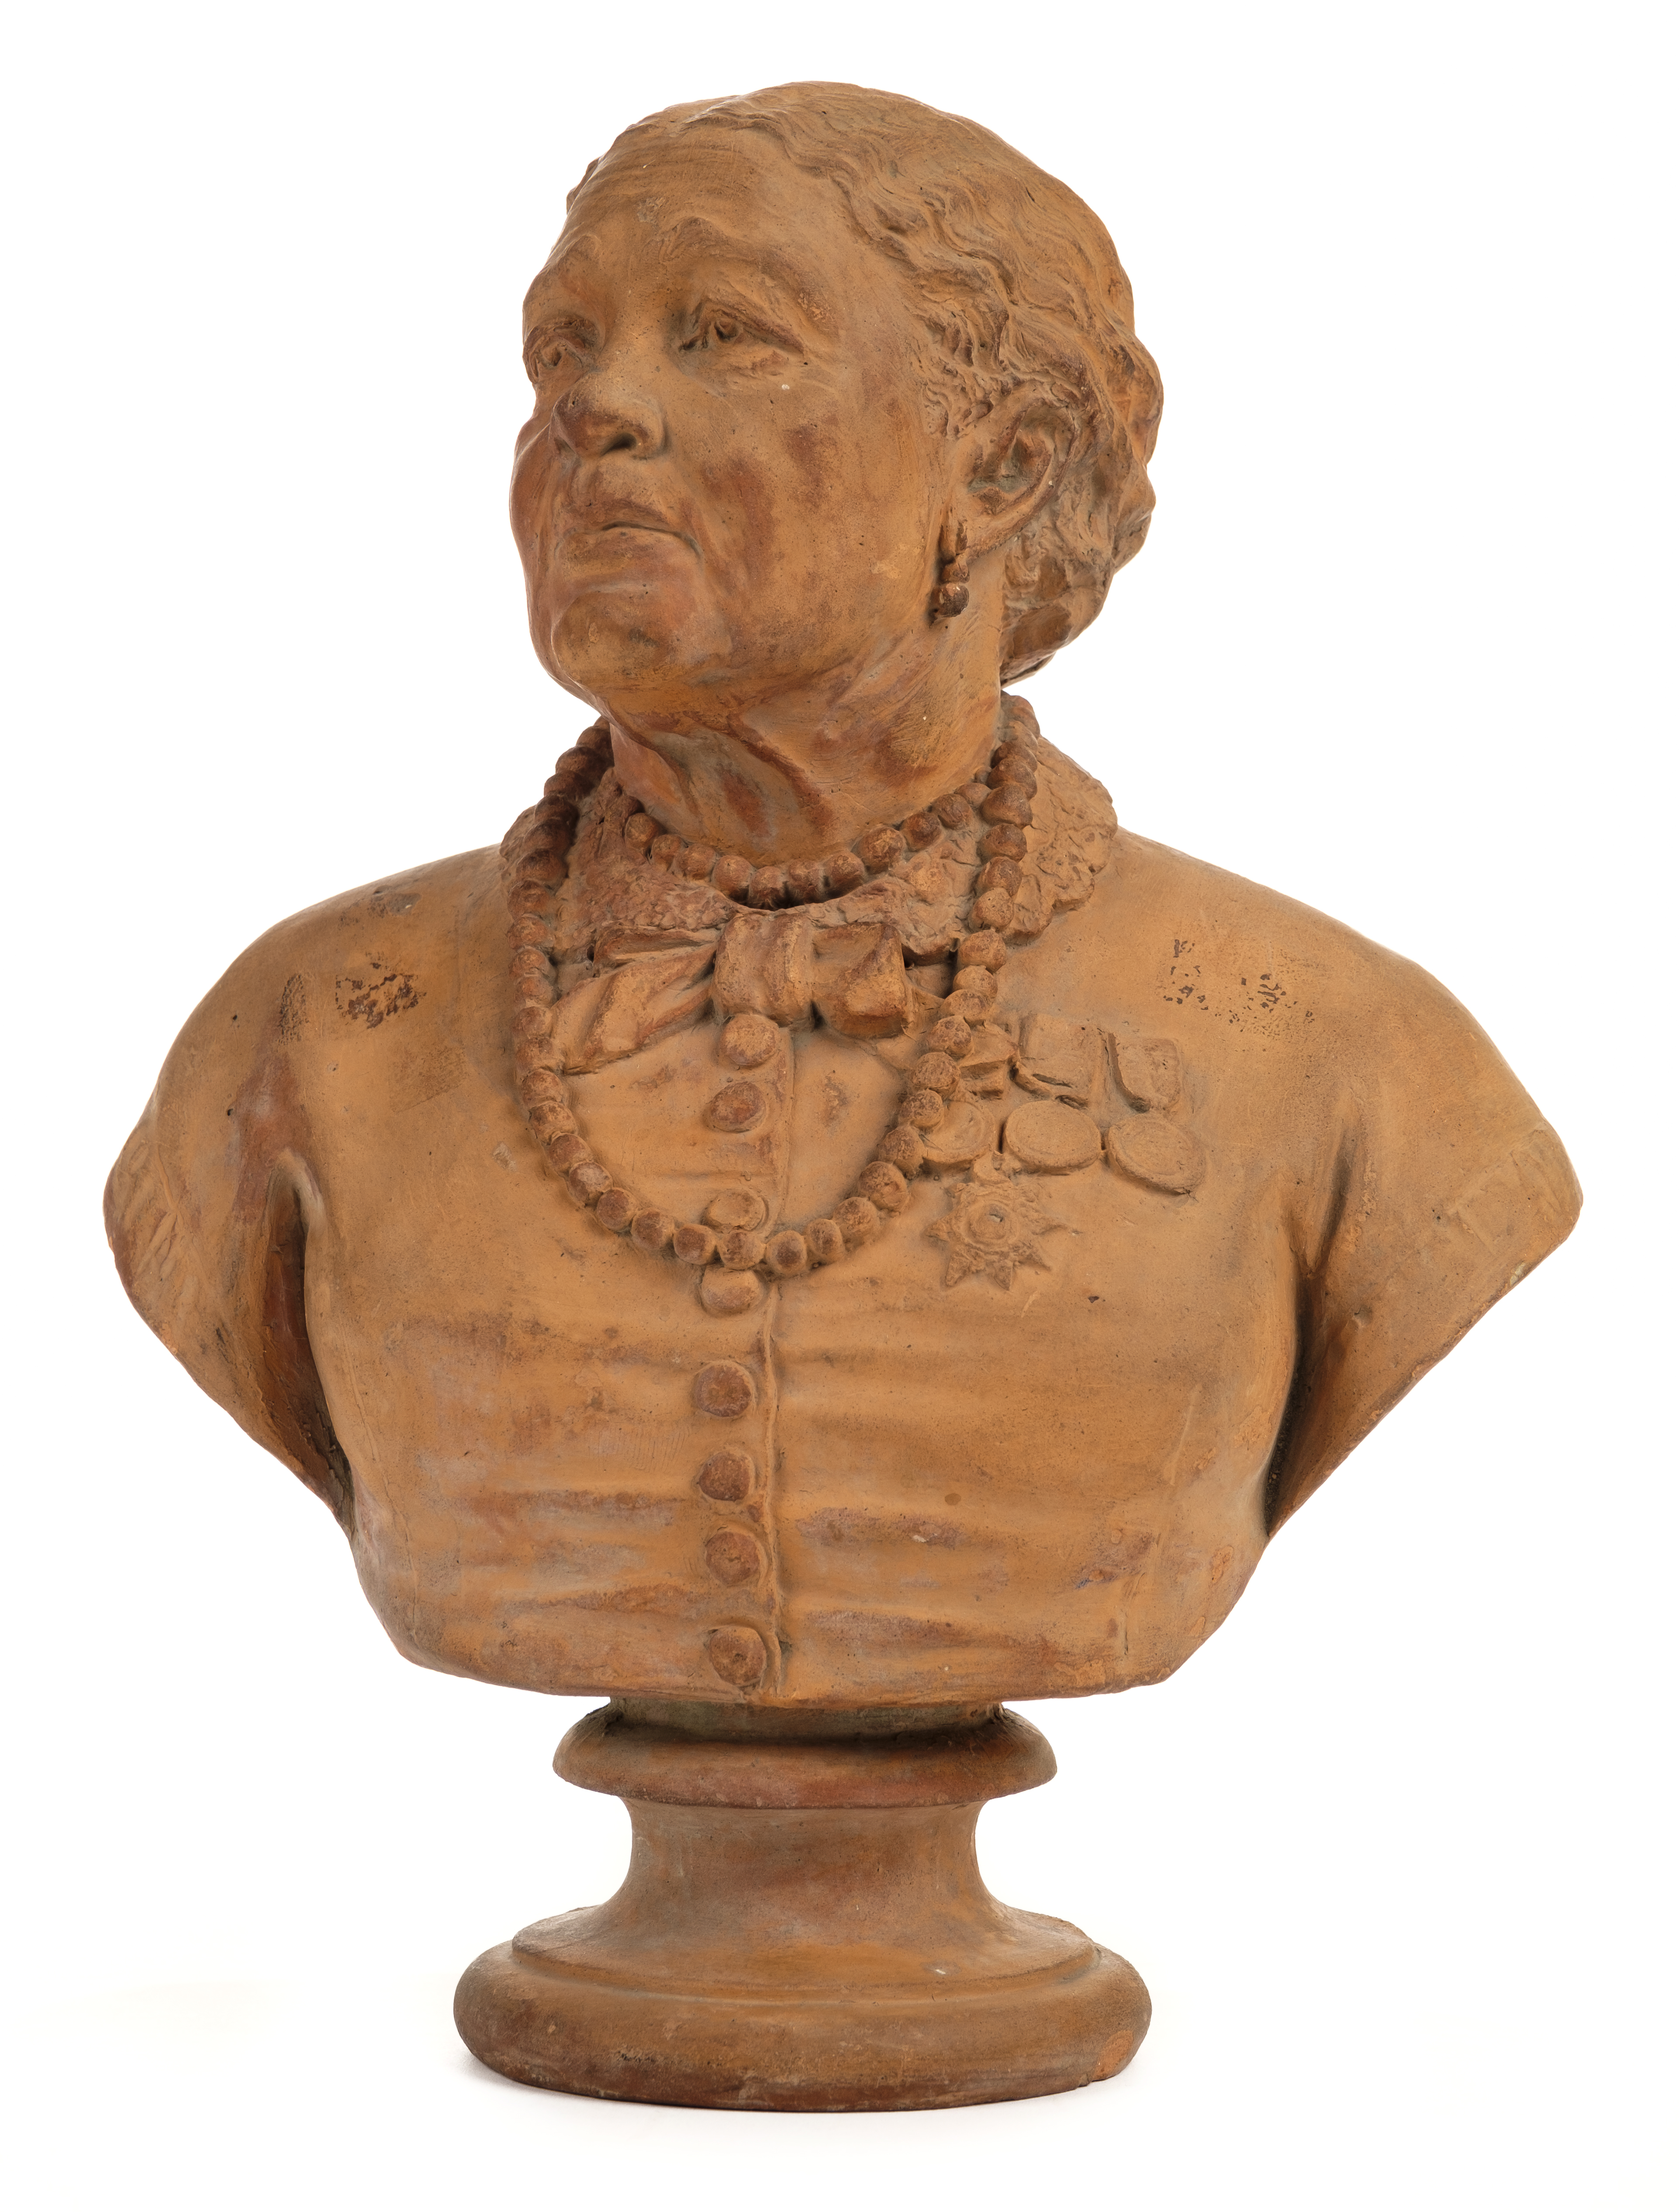 The terracotta bust of Mary Seacole could sell for up to £1,000 (Dominic Winter Auctioneers/PA).